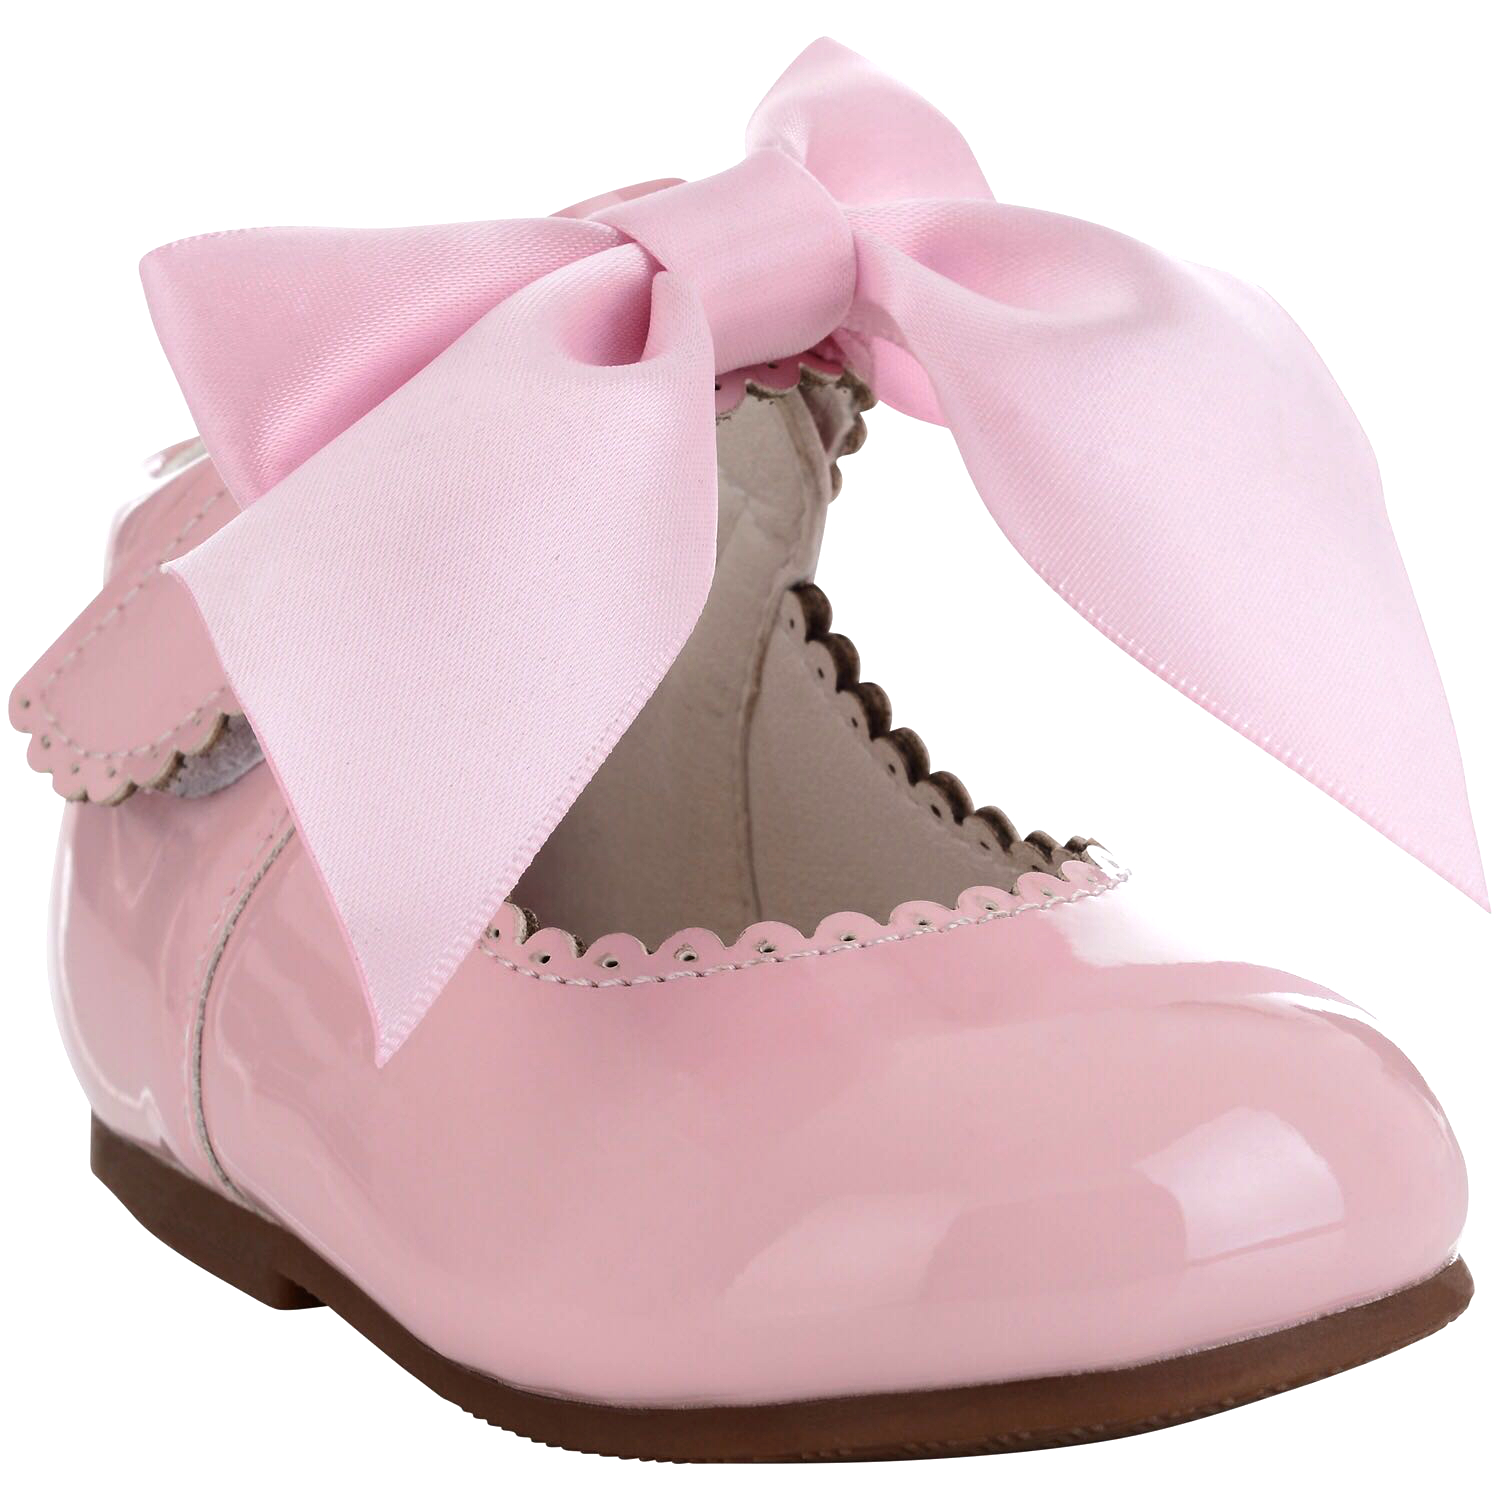 Girls Party Wedding Bridesmaids Christening Shoes Buckle Infants 1 2 3 4 5 6 7 8 